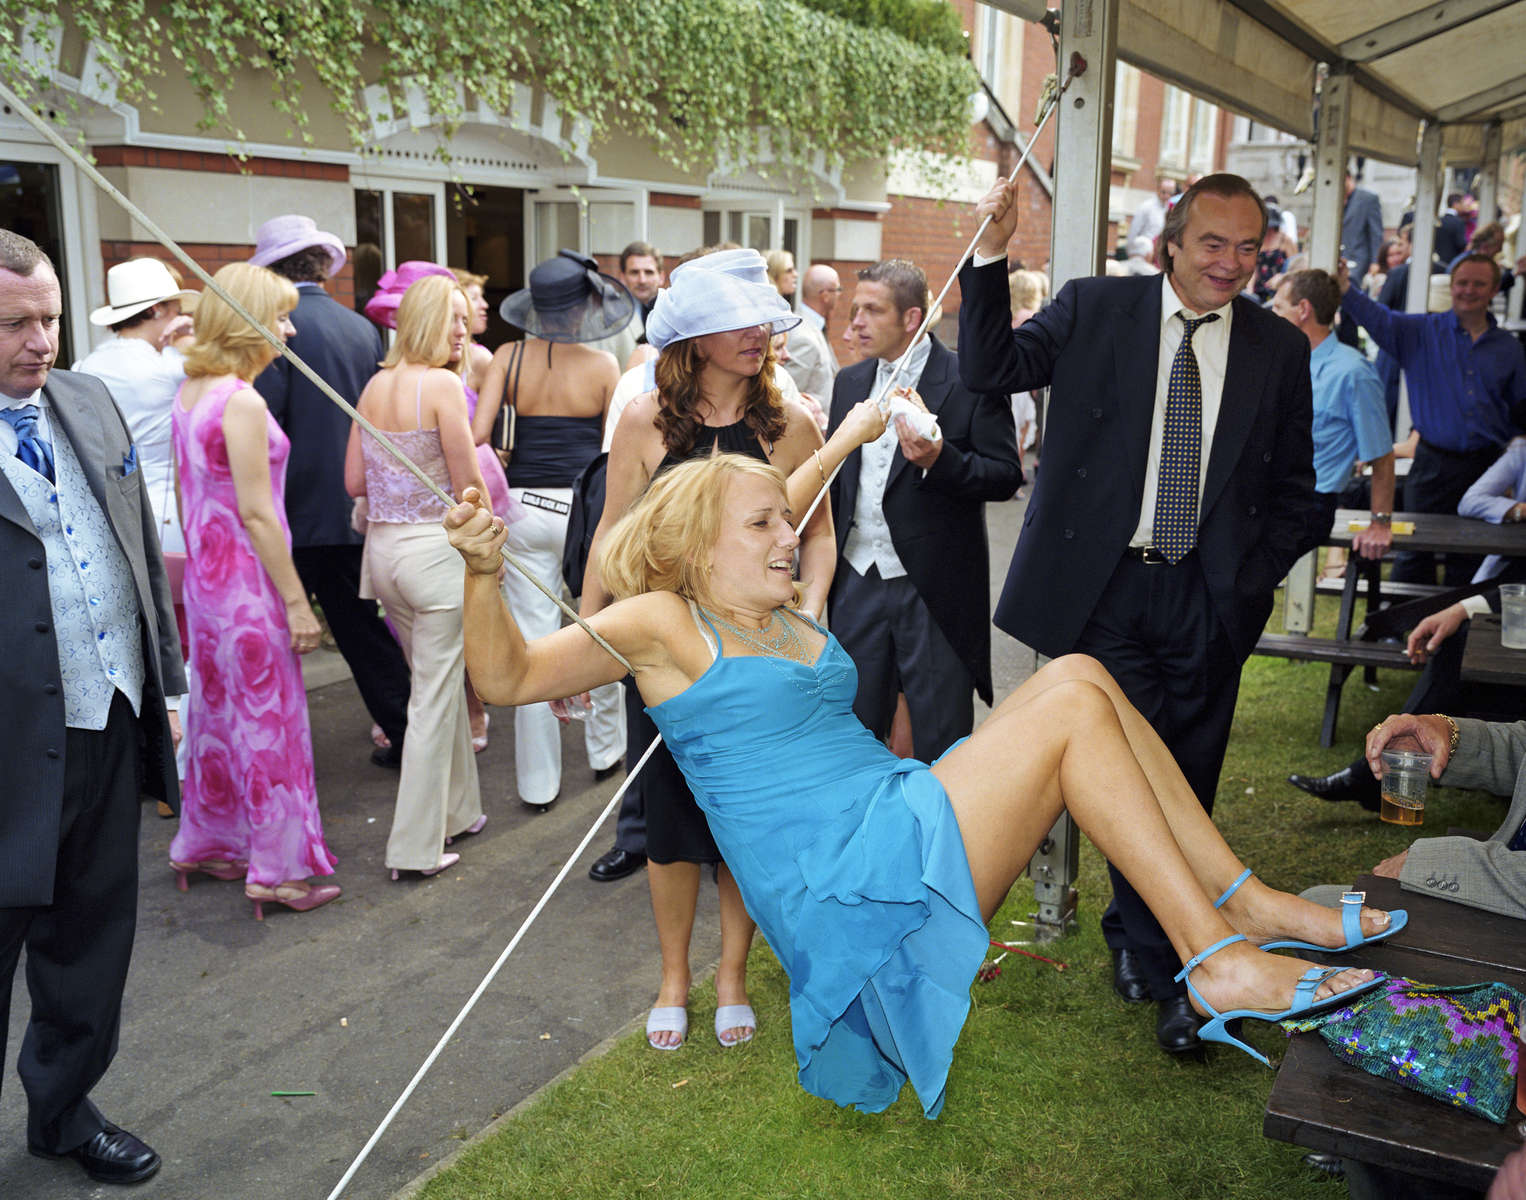 A female visitor to Royal Ascot hangs from the support of a hospitality tent. June 2002